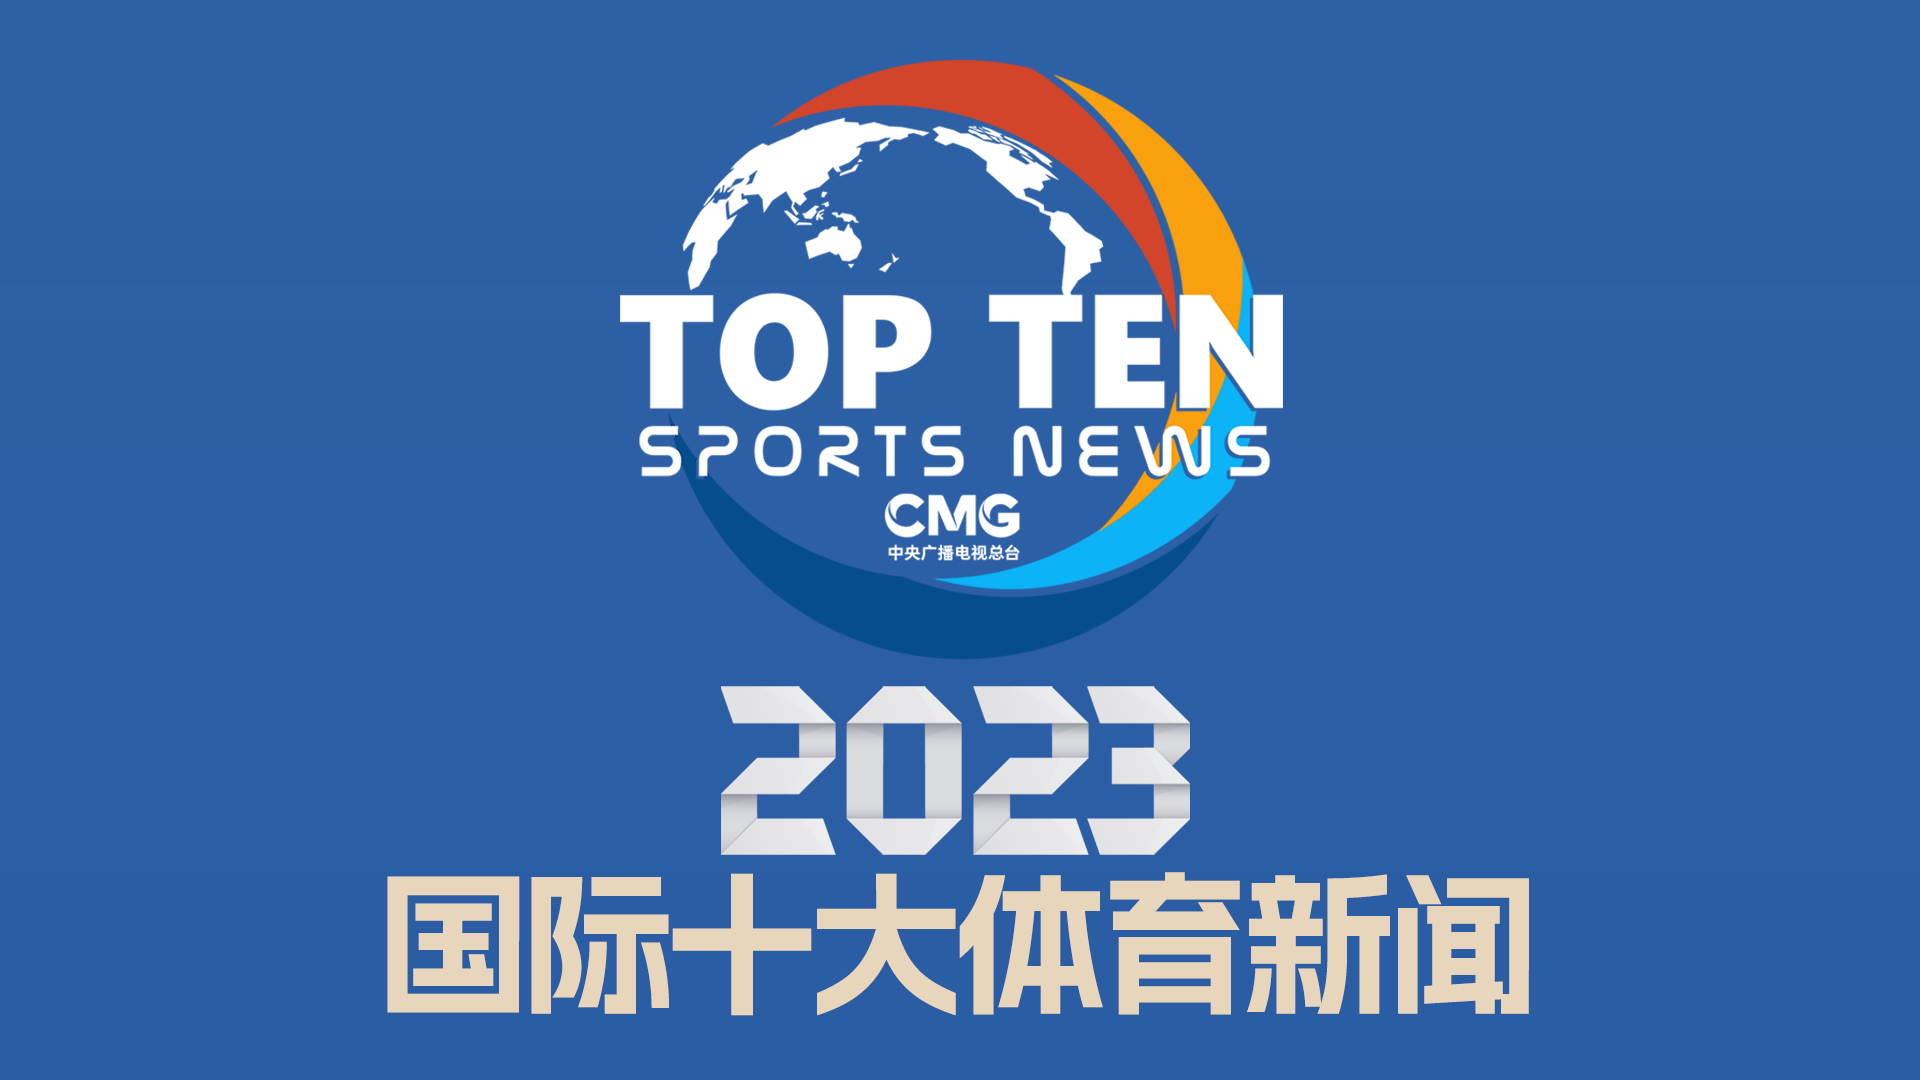 CMG's top 10 international sports news stories of the year that excite the world